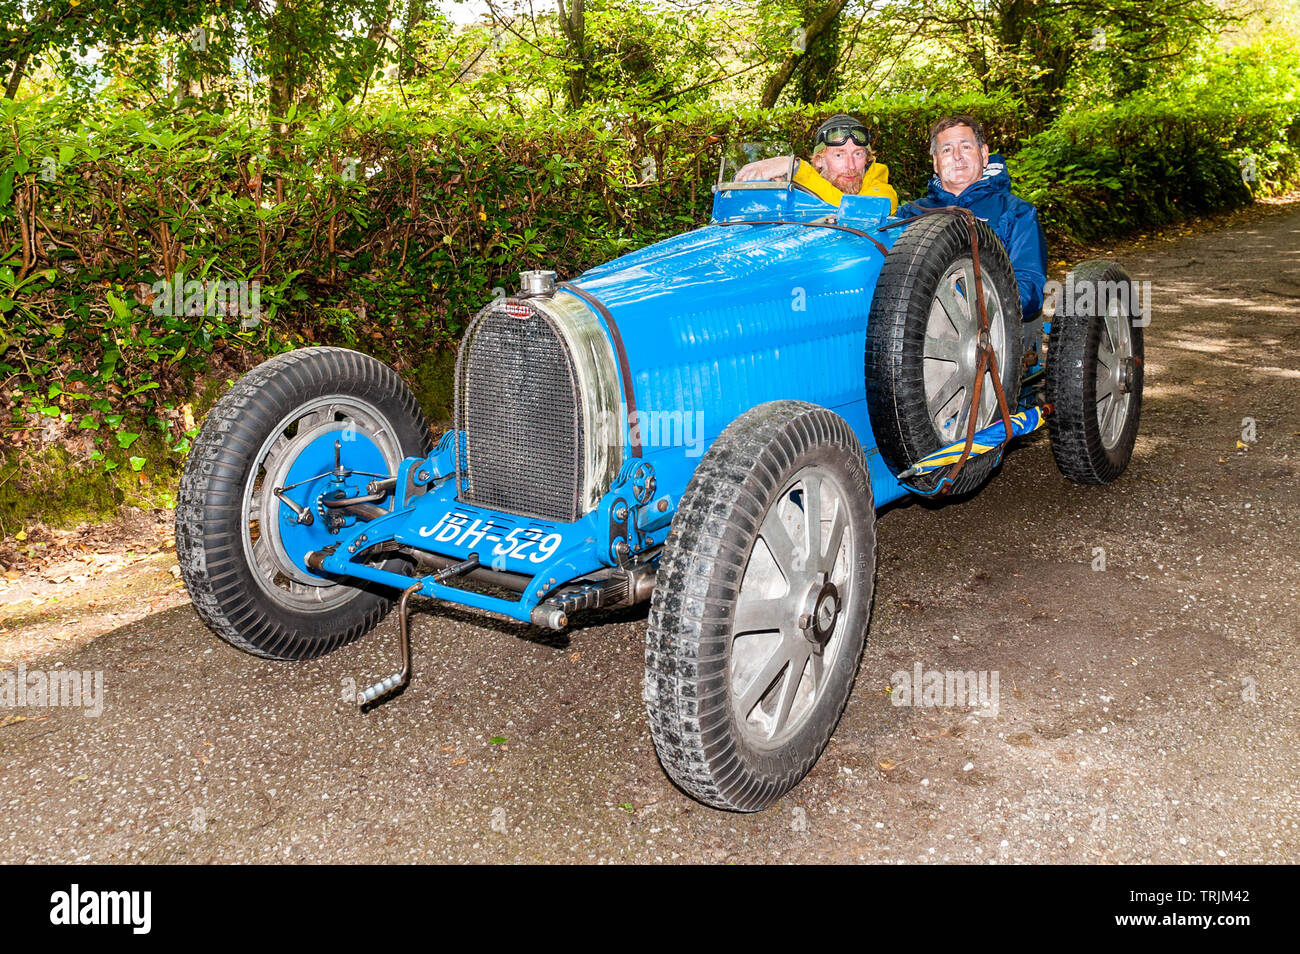 Bantry, West Cork, Ireland. 6th Juine, 2019. The Bugatti Owners Club is in Ireland this week for its annual international rally, featuring 100 vintage Bugatti's. After lunch in the West Lodge Hotel, the cars headed for the Mizen Head. At Bantry House & Gardens were CHris Marks and Mike Kennedy from Edinburgh in their 1933 Type 51 Bugatti. Credit: Andy Gibson/Alamy Live News.. Stock Photo